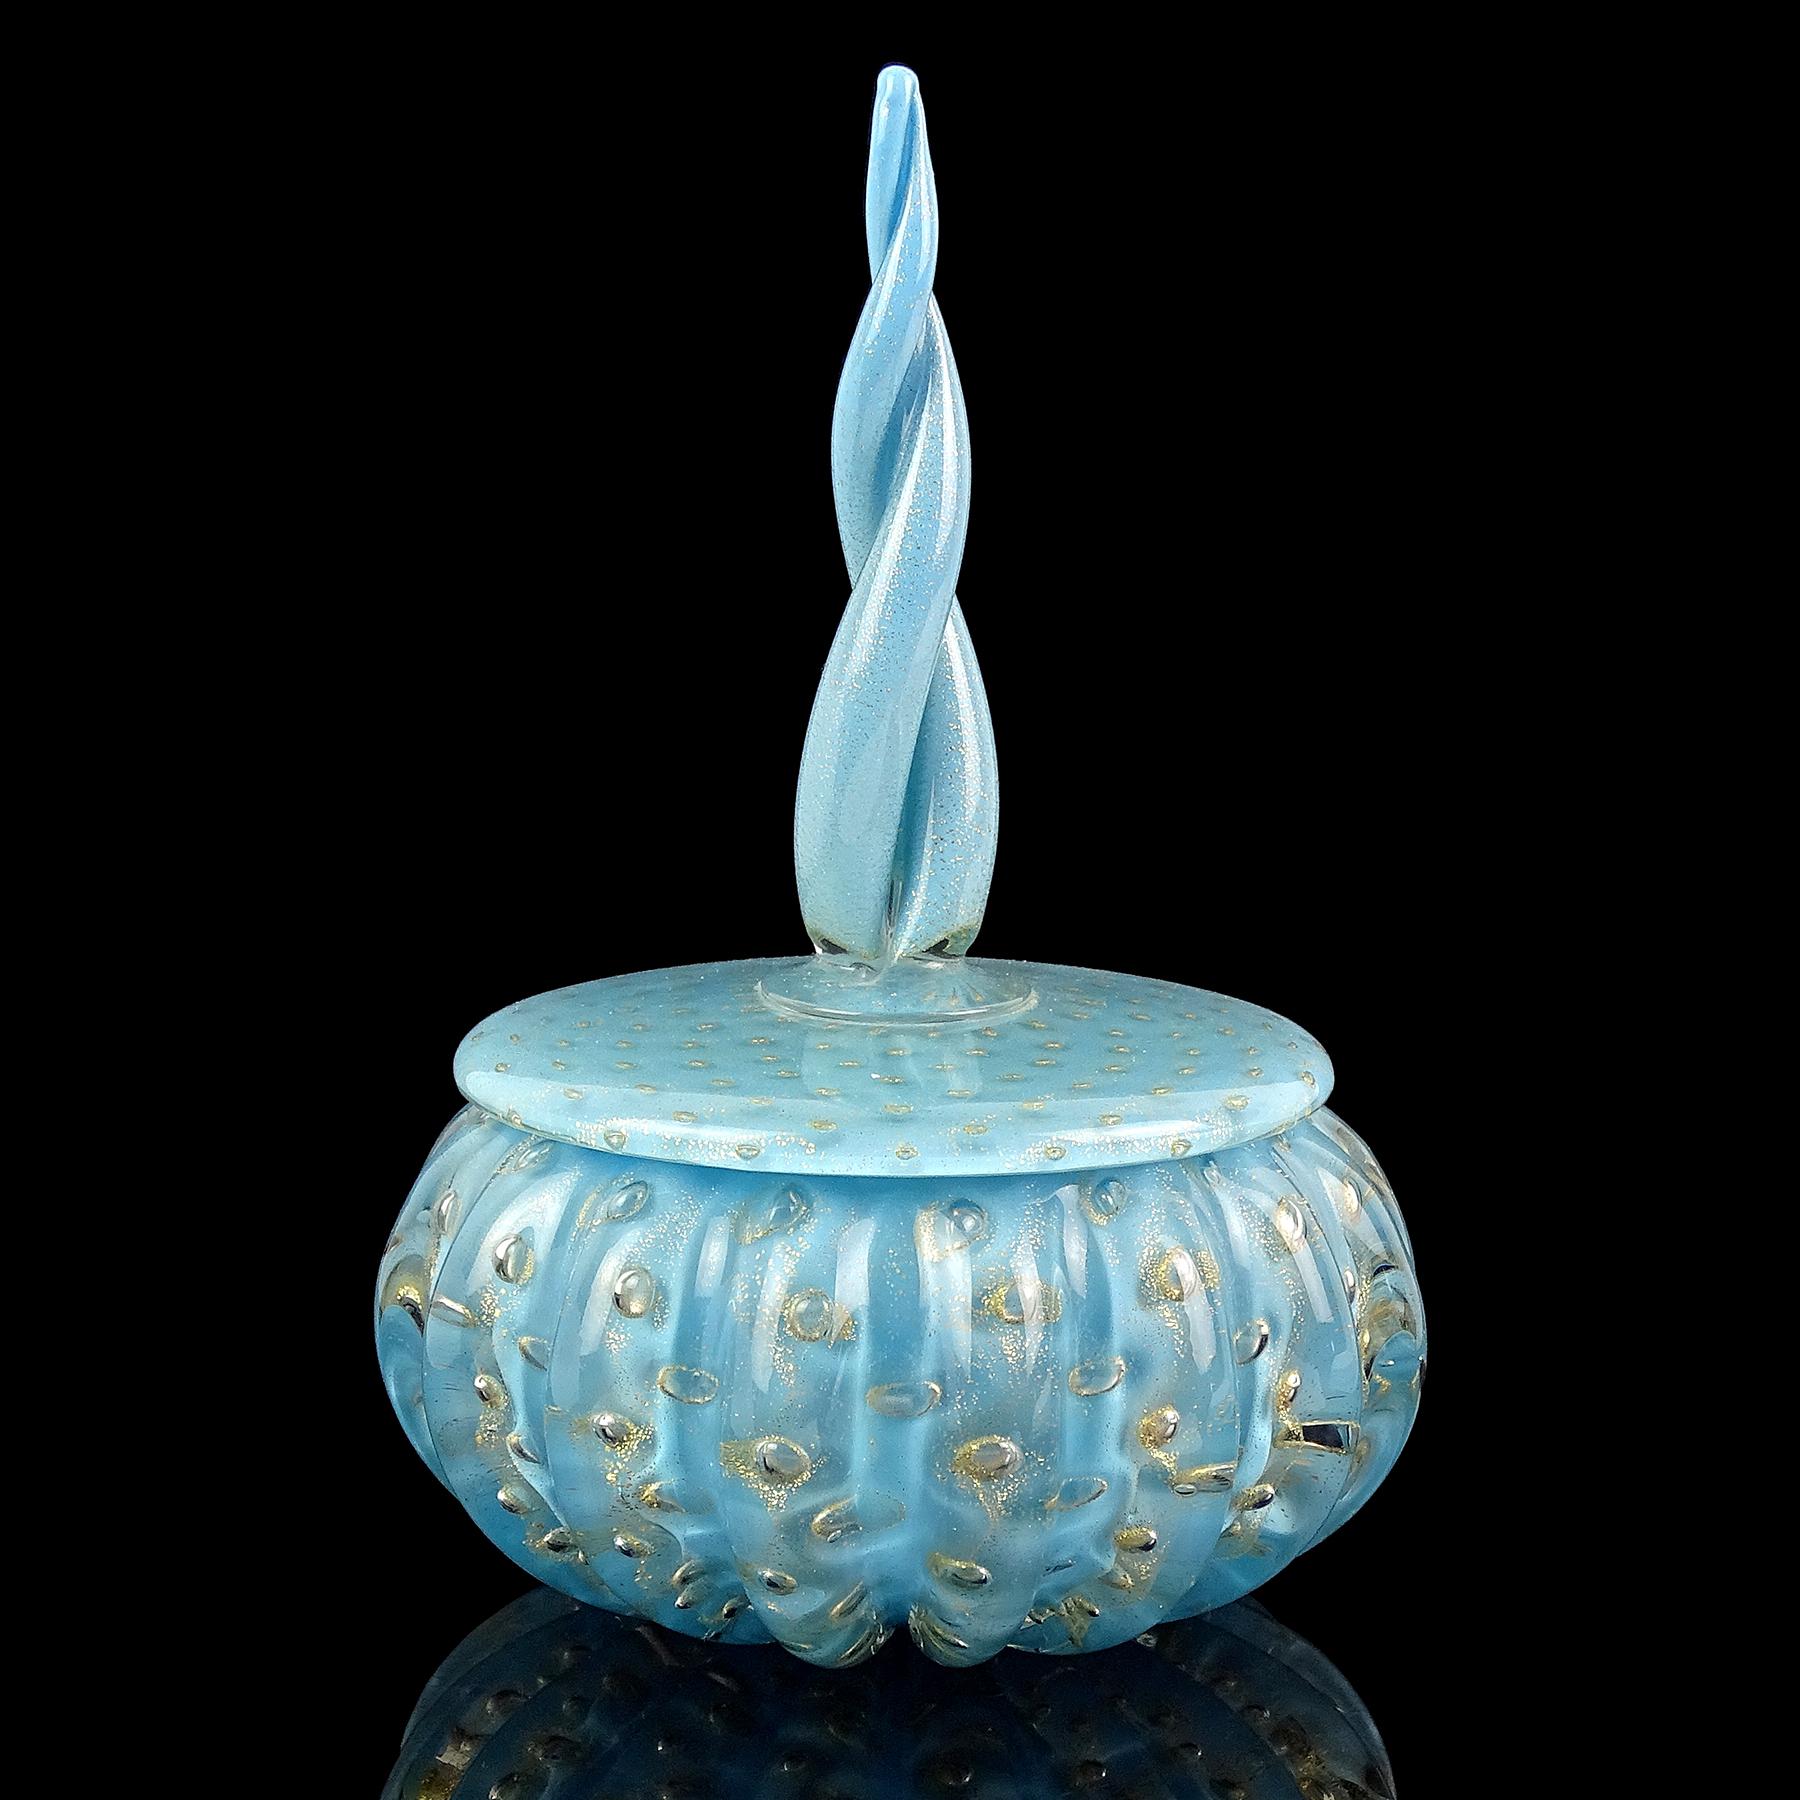 Beautiful vintage Murano hand blown blue, gold flecks and controlled bubbles Italian art glass powder / jewelry box. Documented to designer Alfredo Barbini, circa 1950s. The piece has a twisting spike top decoration on the lid of the box. The entire